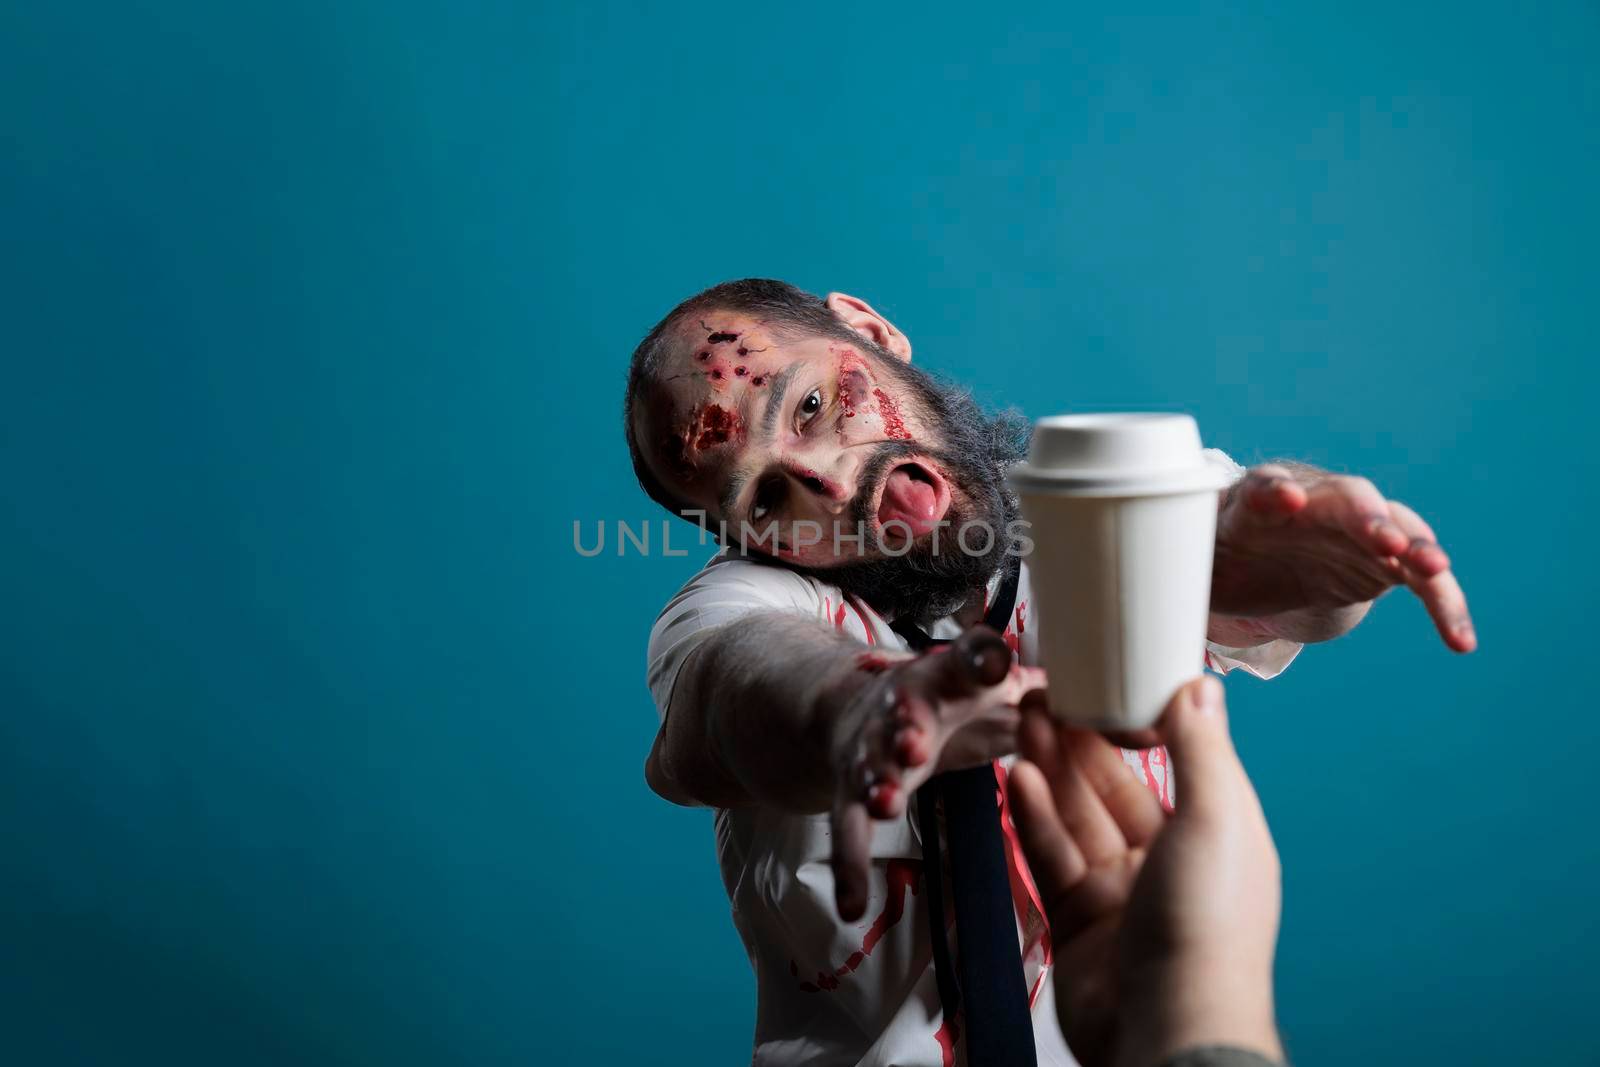 Aggressive halloween corpse wishing to drink coffee cup in studio, going after beverage and wanting to eat carbon. Spooky undead scary devil chasing hand with drink, acting dangerous and creepy.